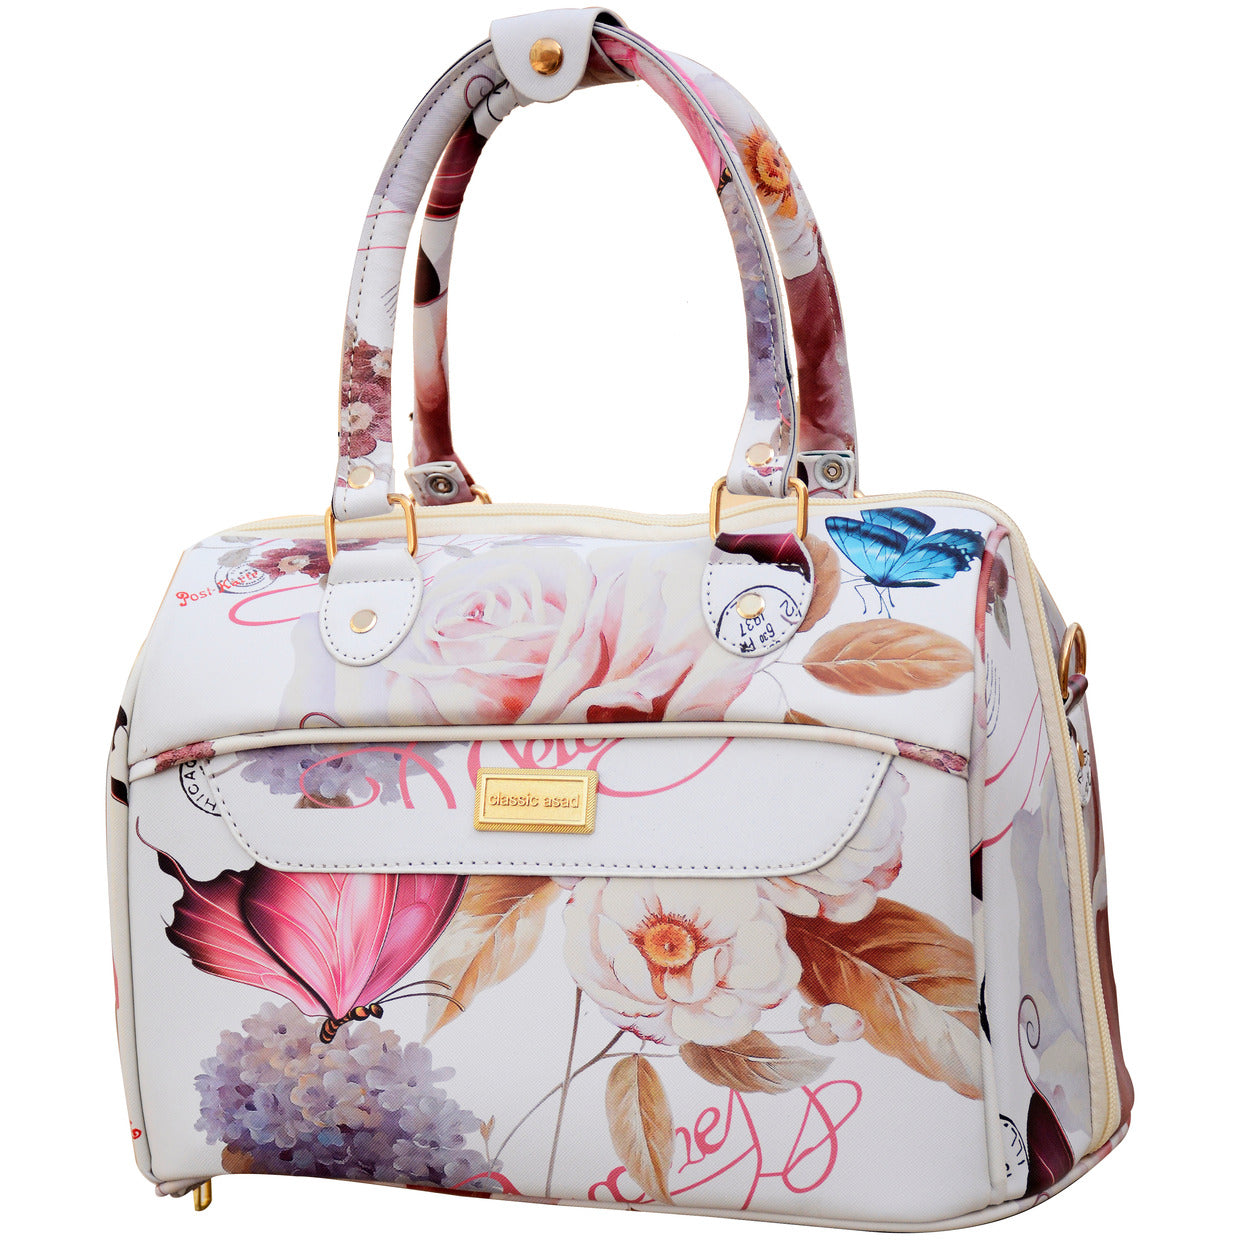 4 Pcs Set 7" 20" 24" 28 inches Soft Shell PU Leather Material Butterfly Printed Luggage Bag